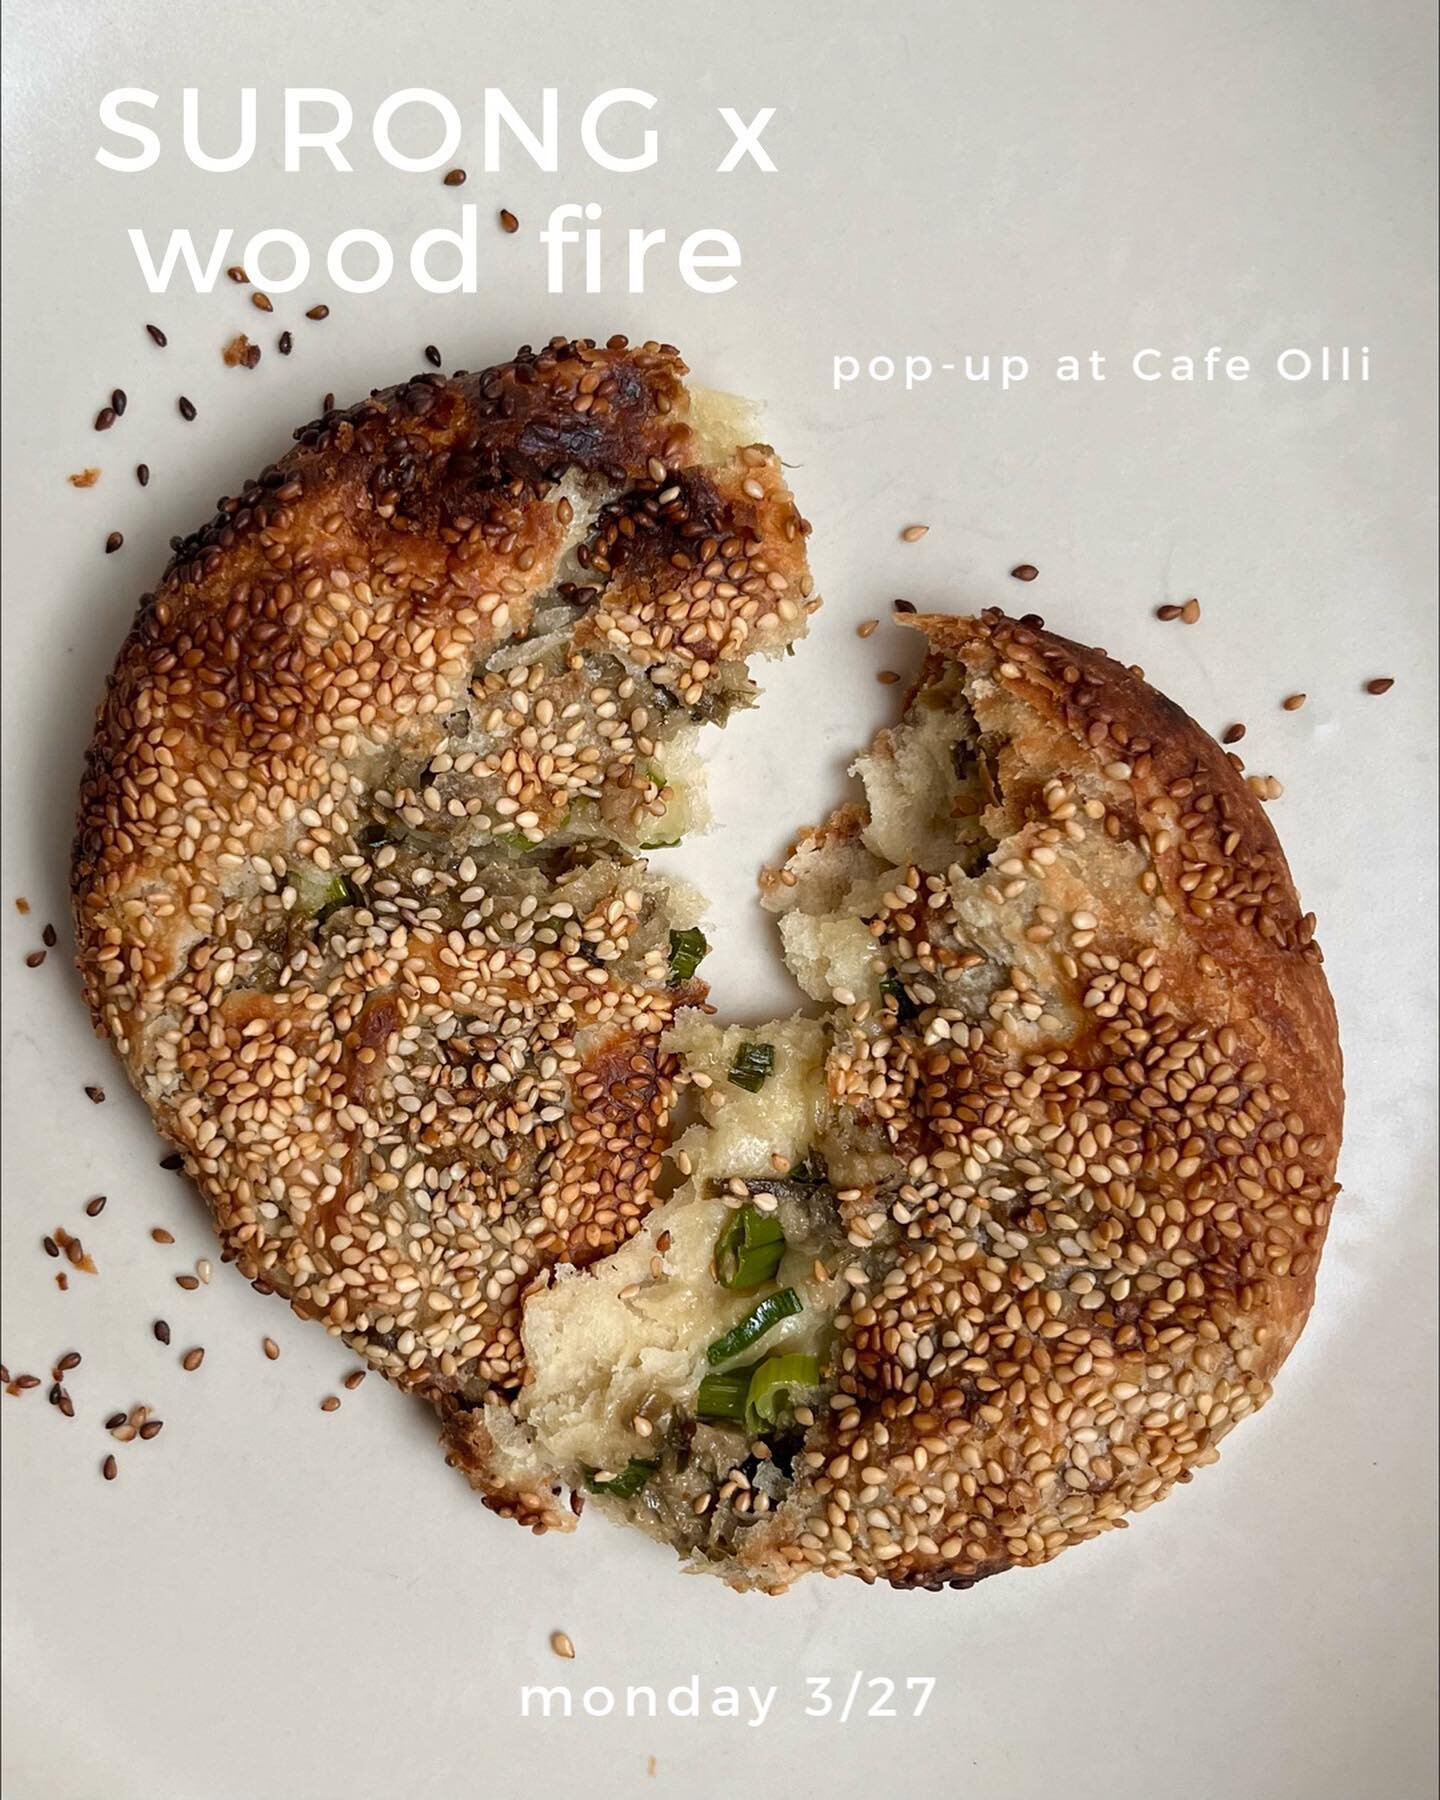 WOOD-FIRED CHINESE BREAD and the flaky, crusty shaobing of my dreams. Get excited for our March 27 pop-up @cafeolli! 

Reservation link will be sent out in an email Friday at 12PM, you can sign up for that mailing list at surongpdx.com